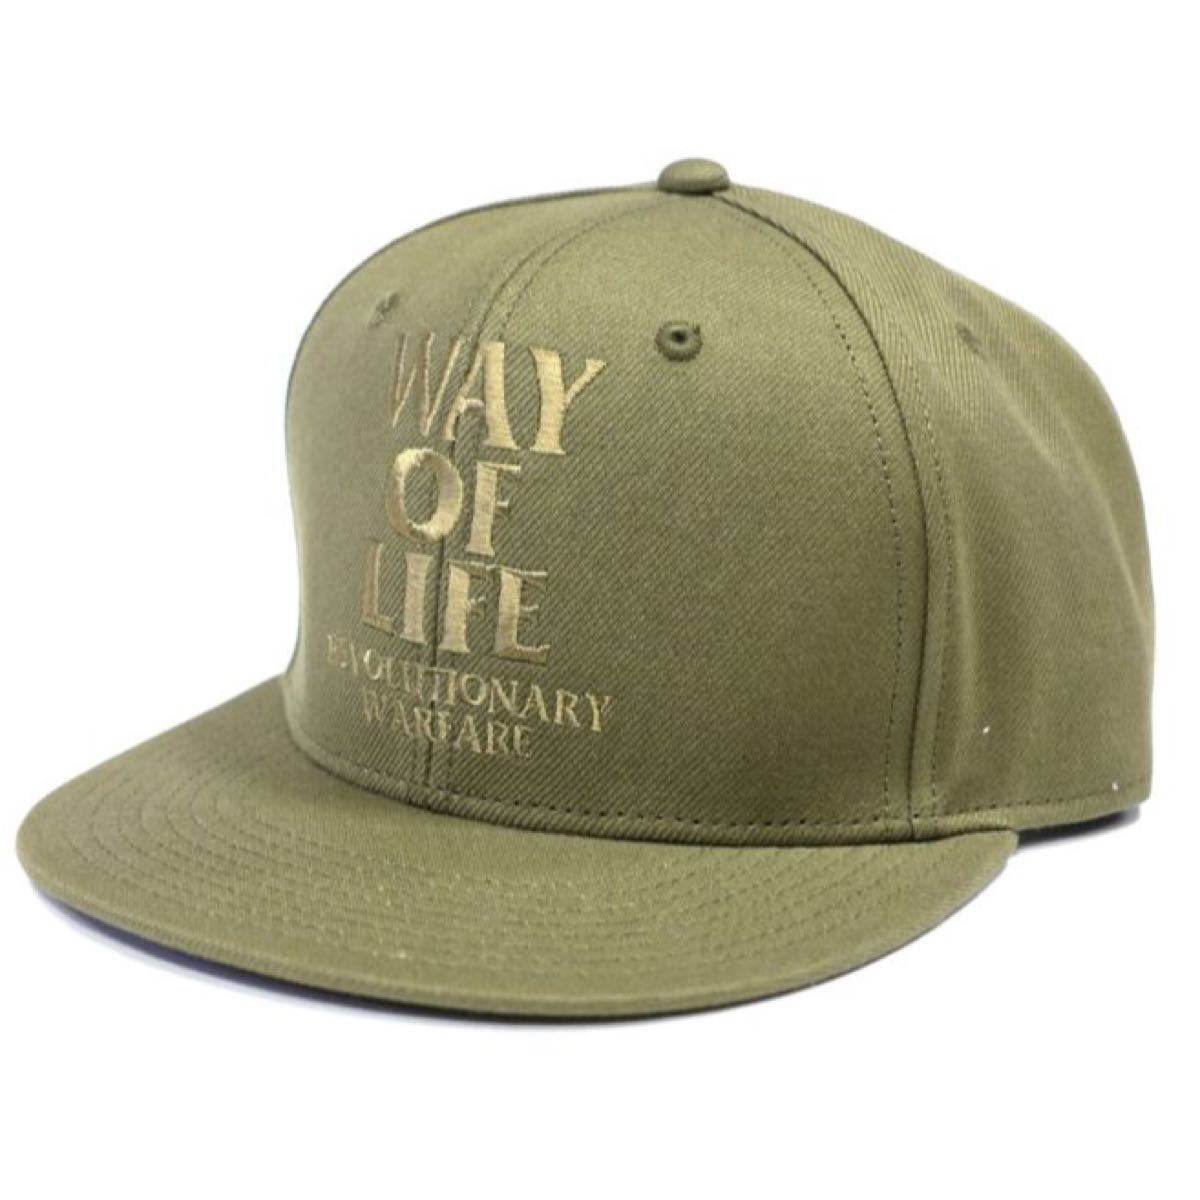 RATS EMBROIDERY CAP WAY OF LIFE キムタク長瀬着-